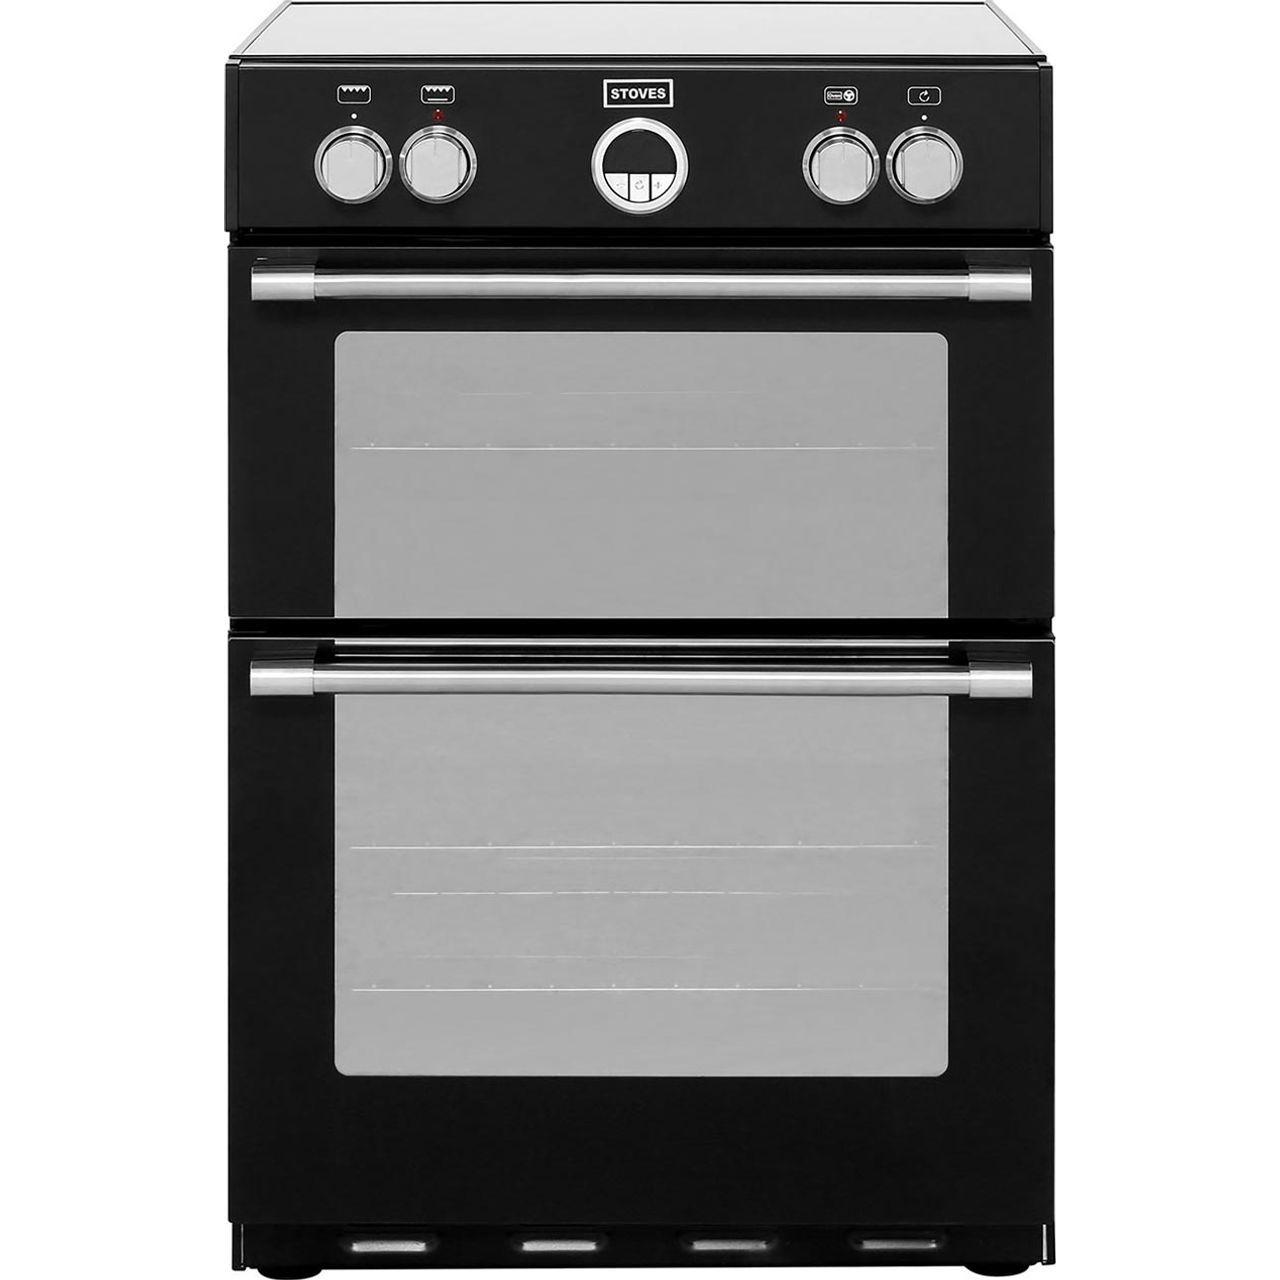 Stoves Sterling600MFTi 60cm Electric Cooker with Induction Hob Review